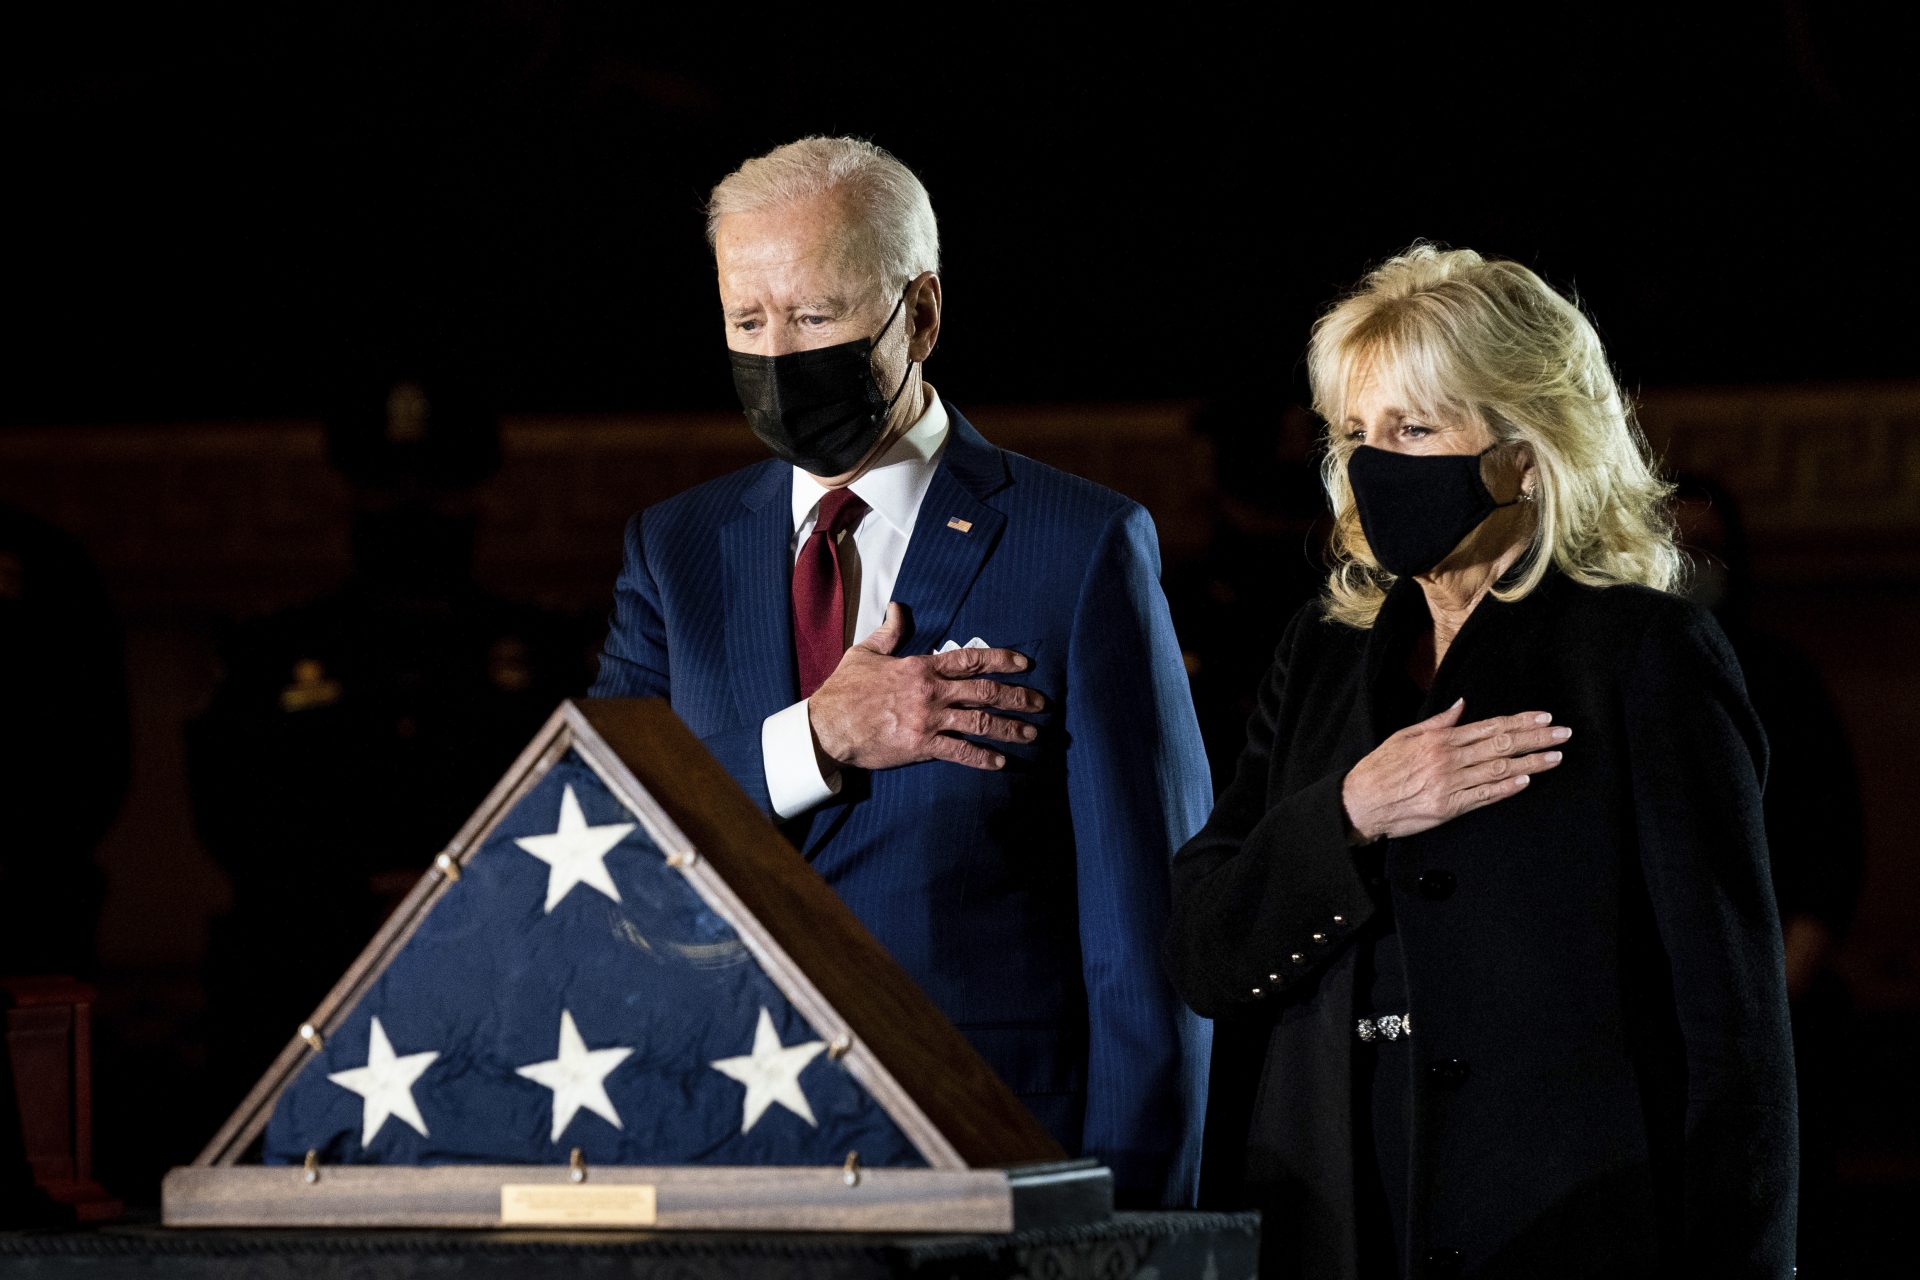 President Joe Biden and first lady Jill Biden pay their respects to the late U.S. Capitol Police officer Brian Sicknick as an urn with his cremated remains lies in honor on a black-draped table at the center of Capitol Rotunda, Tuesday, Feb. 2, 2021, in Washington.